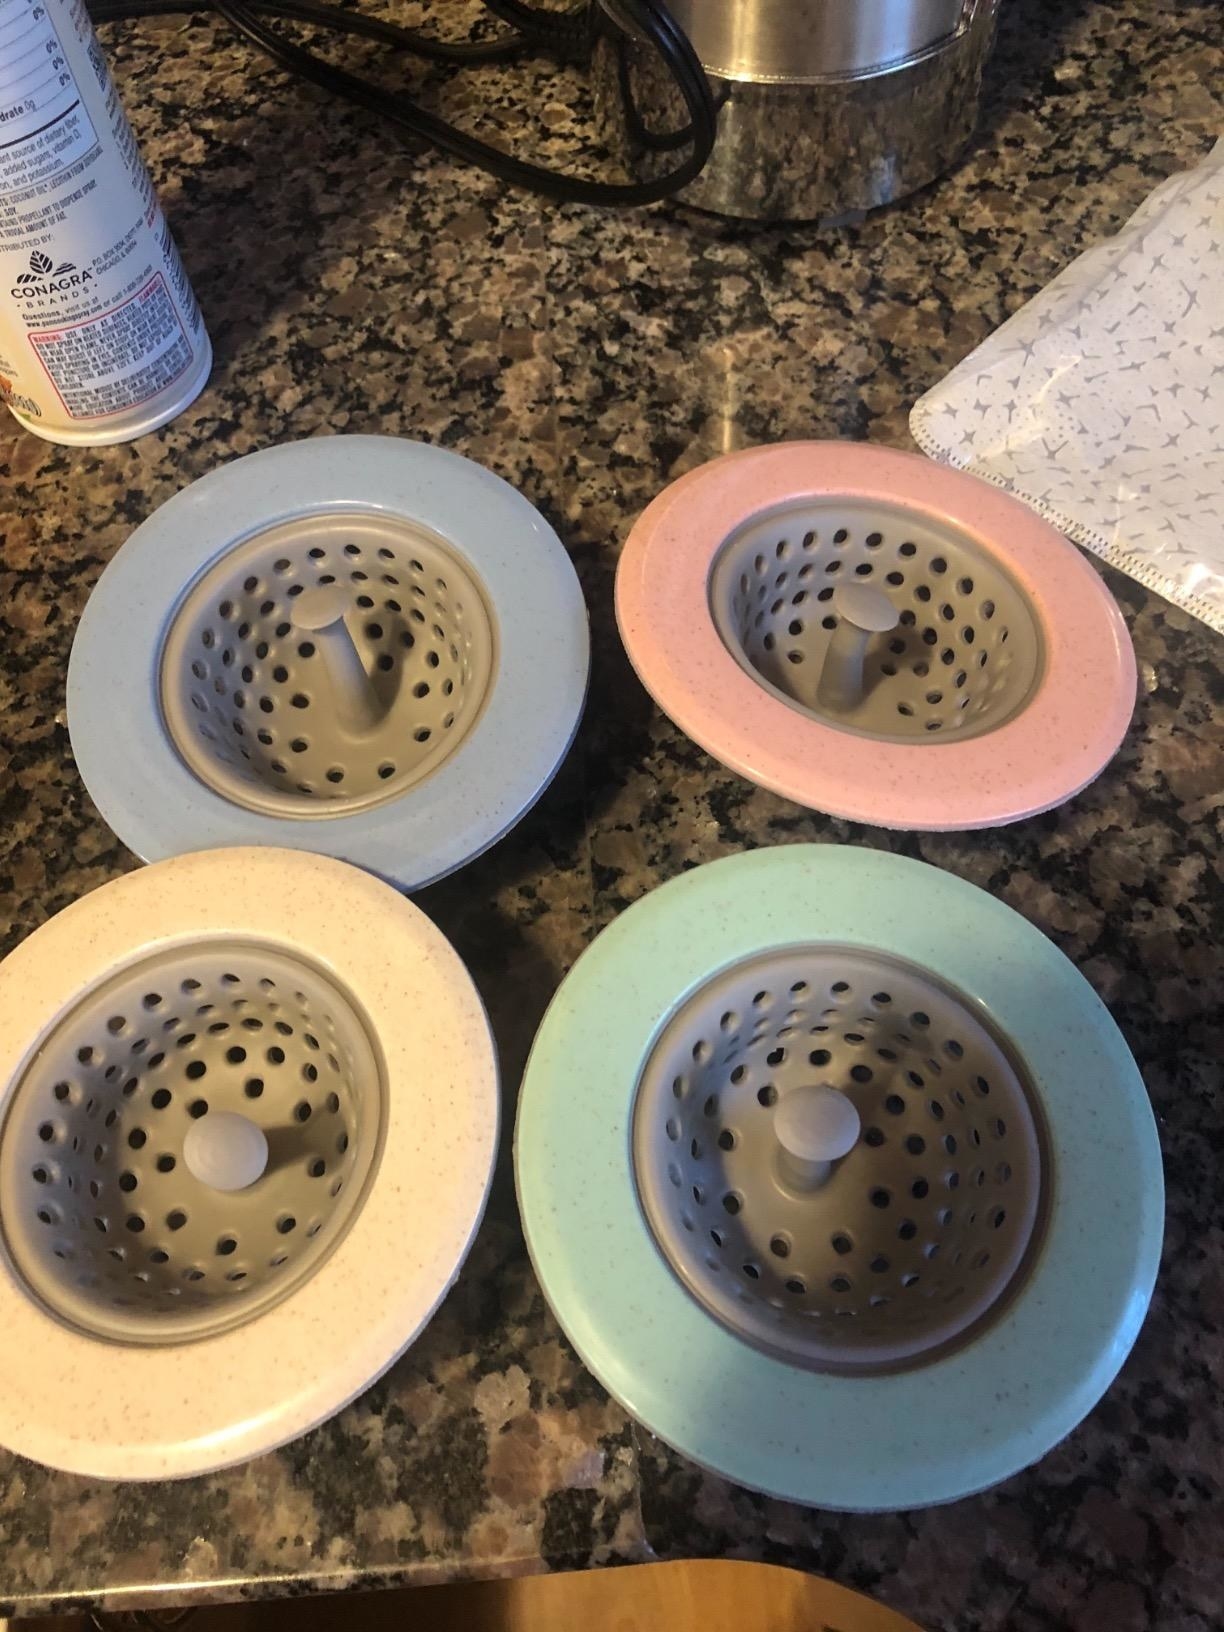 A reviewer photo of the strainers, which have gray centers and pastel-colored rims